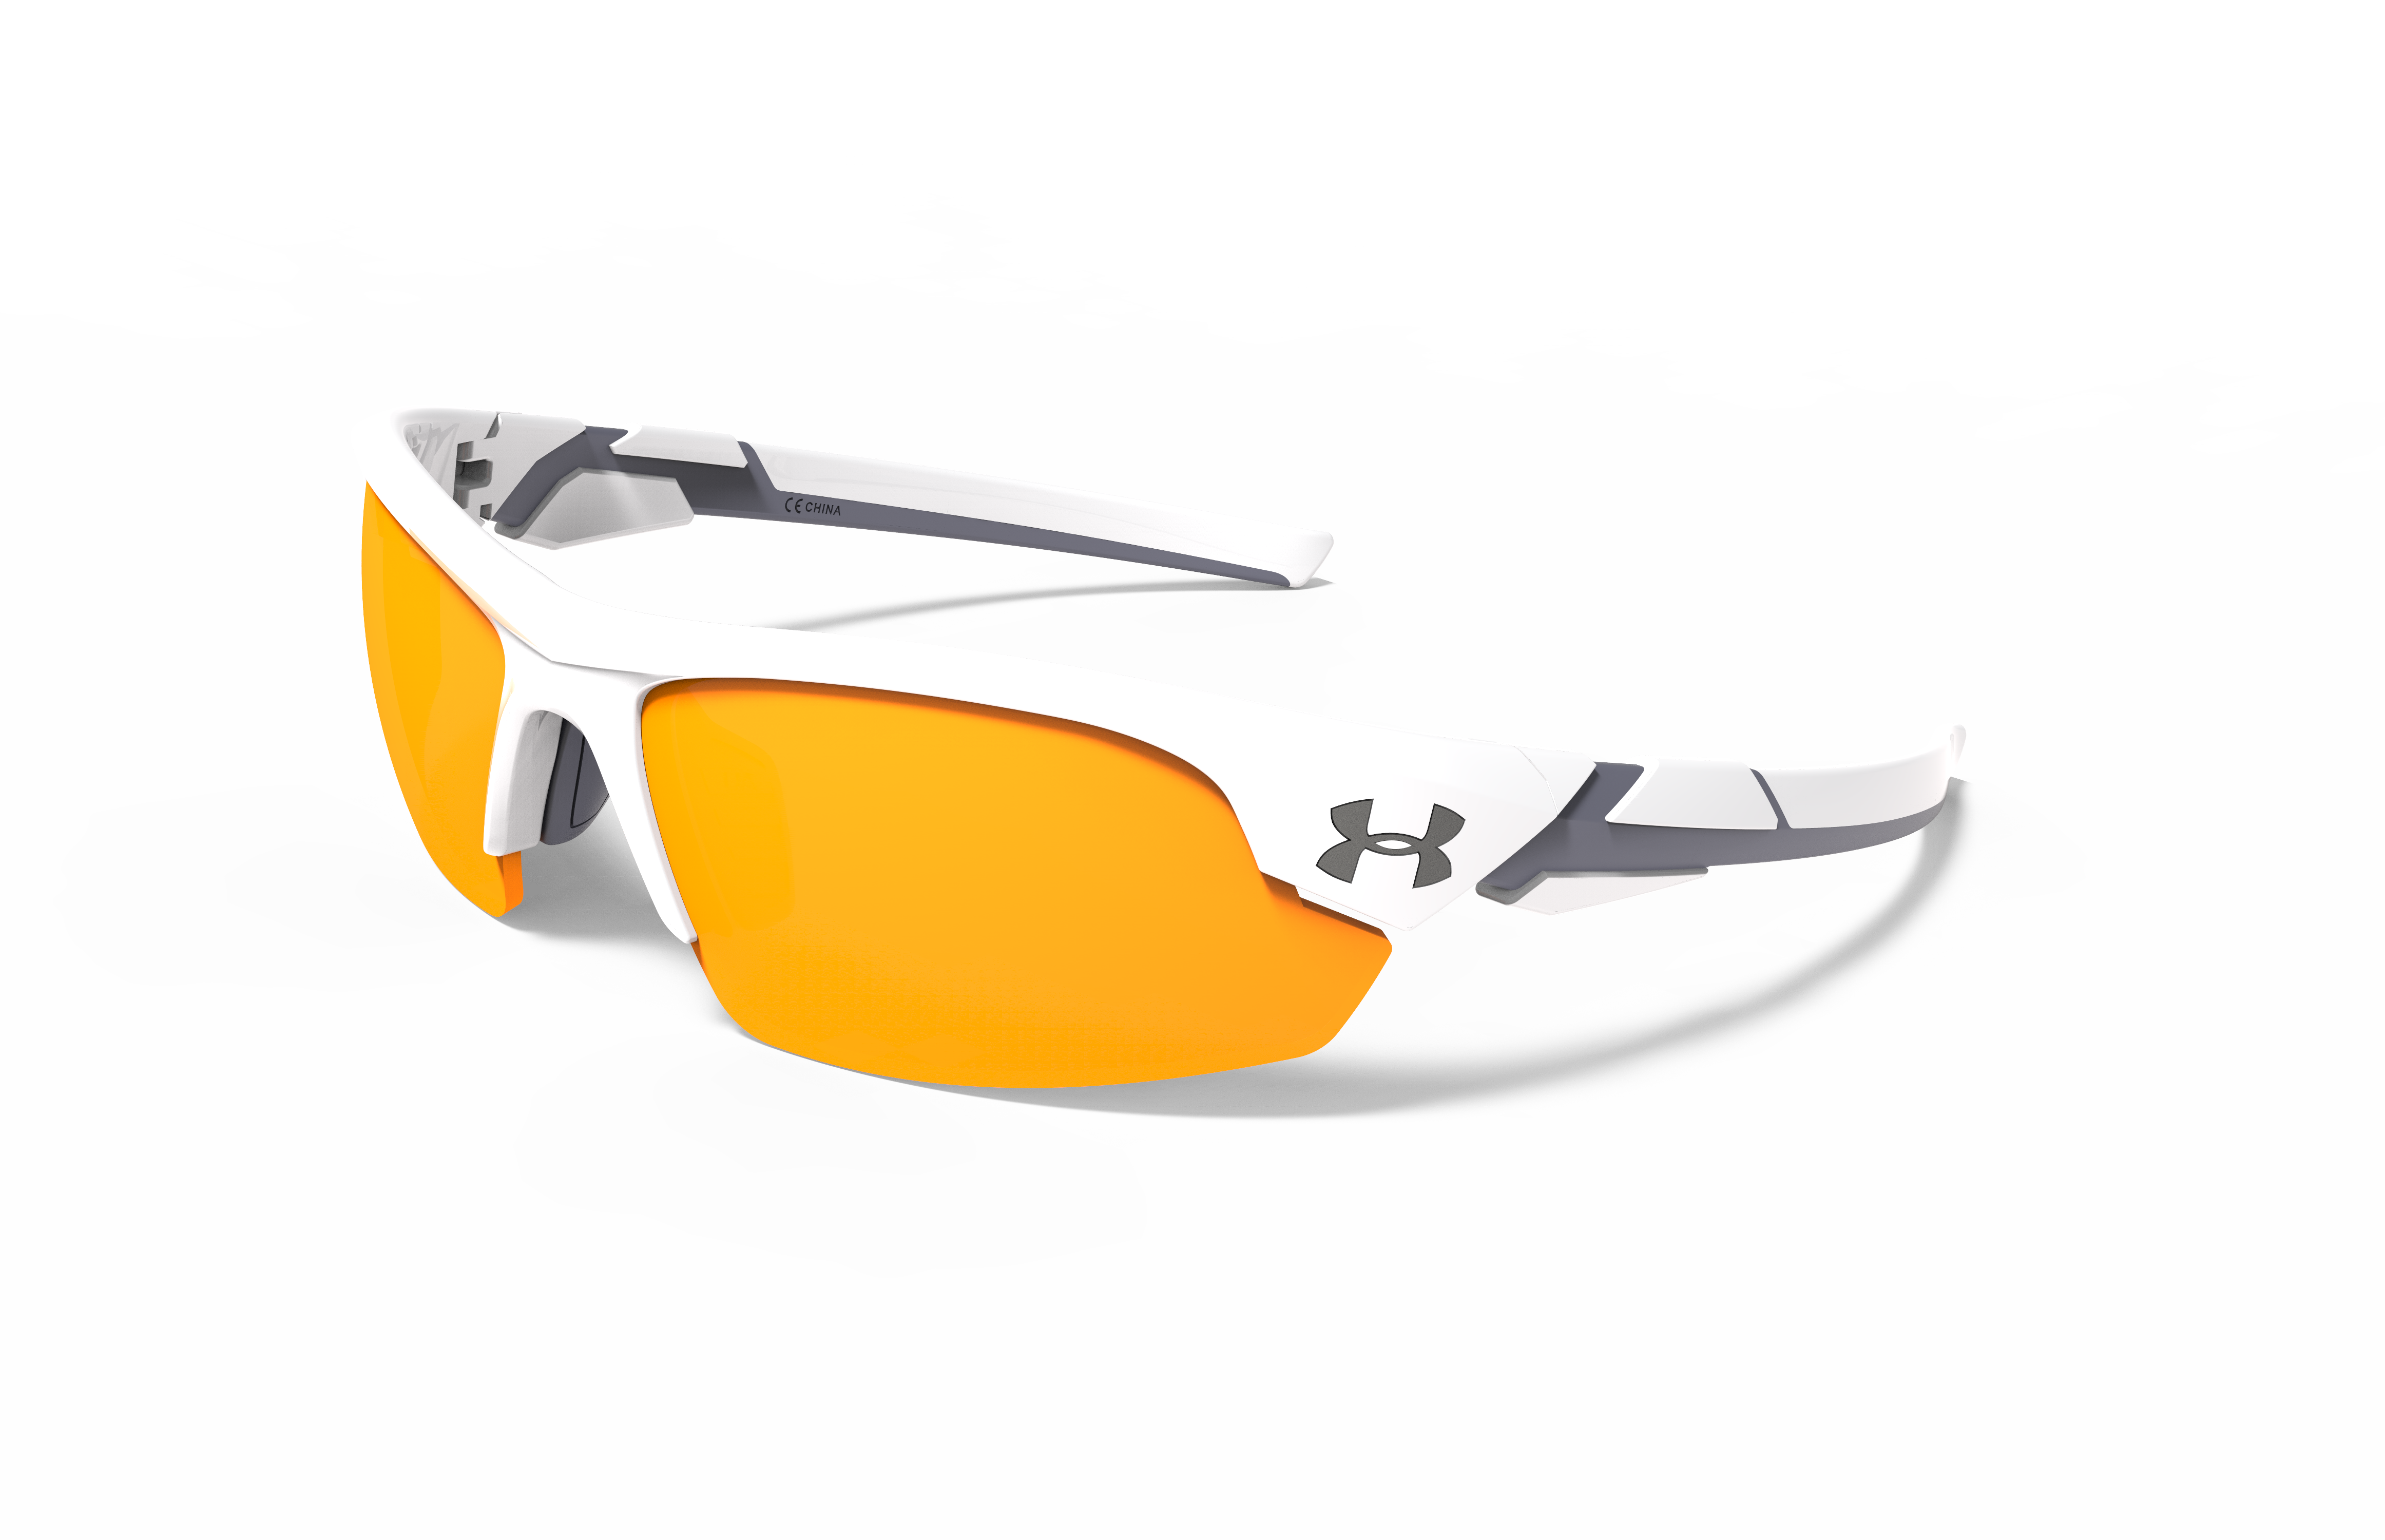 under armour sports glasses